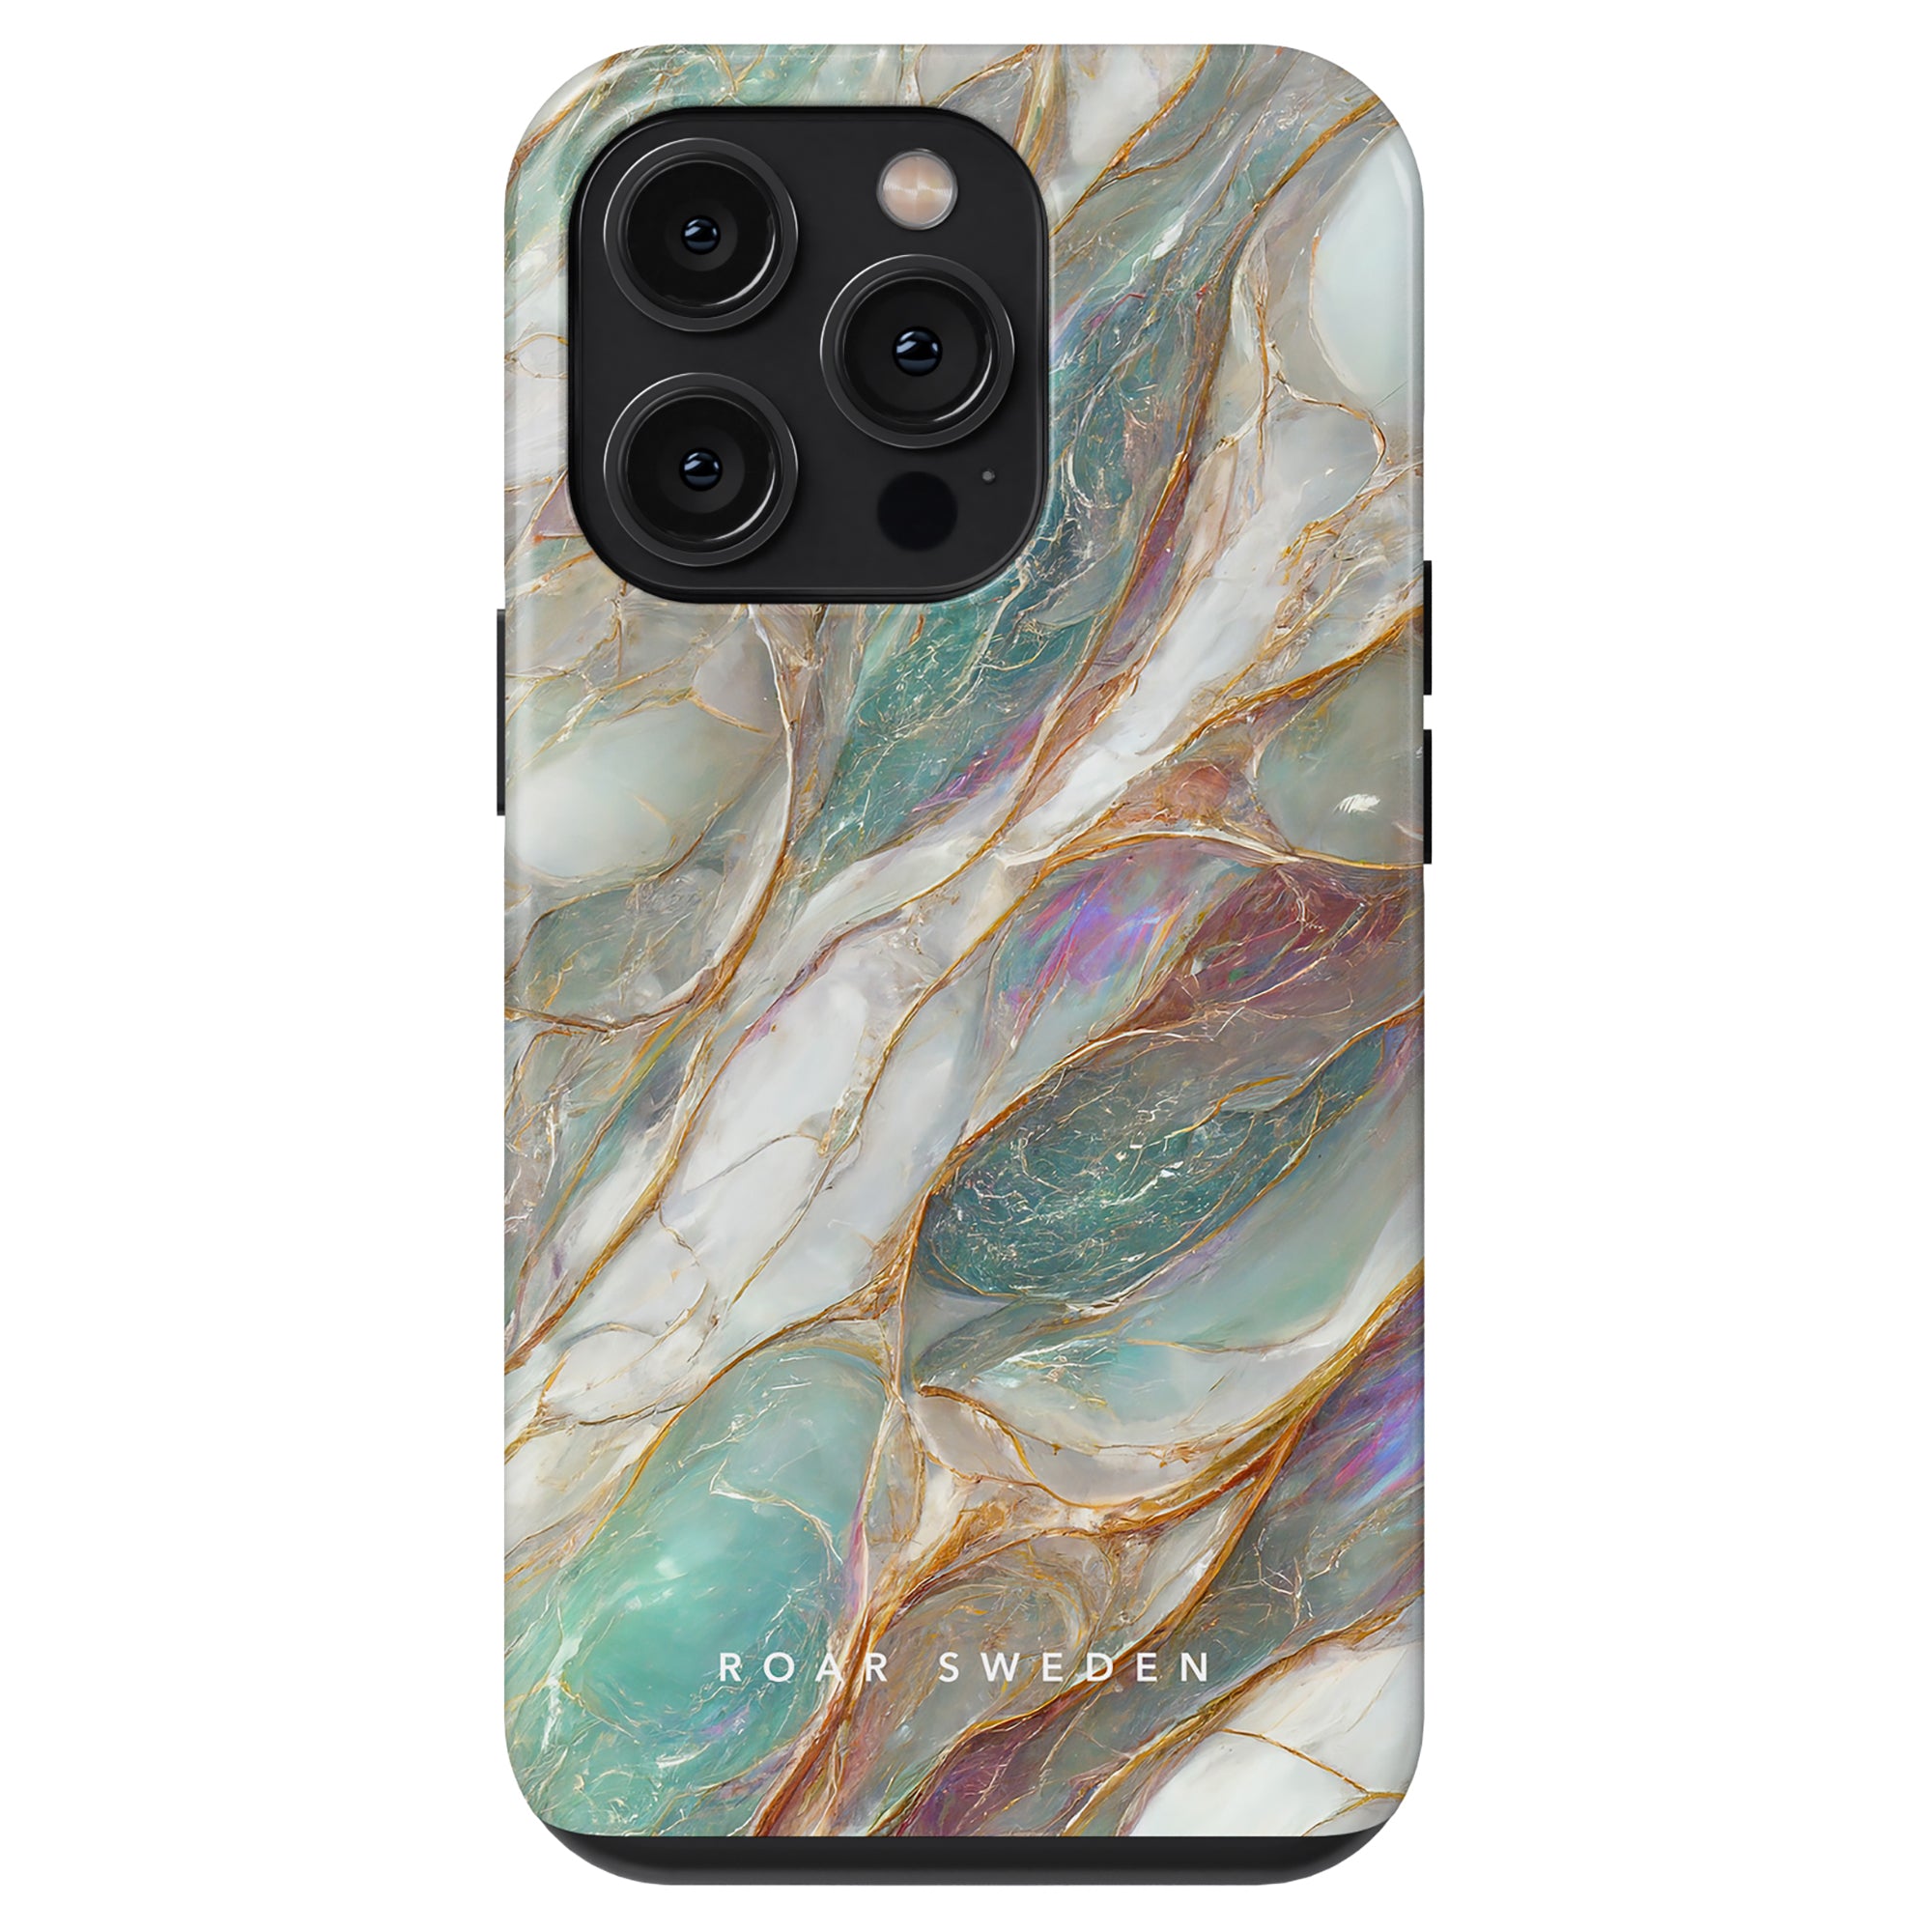 Mother of Pearl - Tough Case: A smartphone case with a Mother of Pearl design in swirling tones of white, beige, and blue, featuring a triple camera setup and the text "roar sweeden.